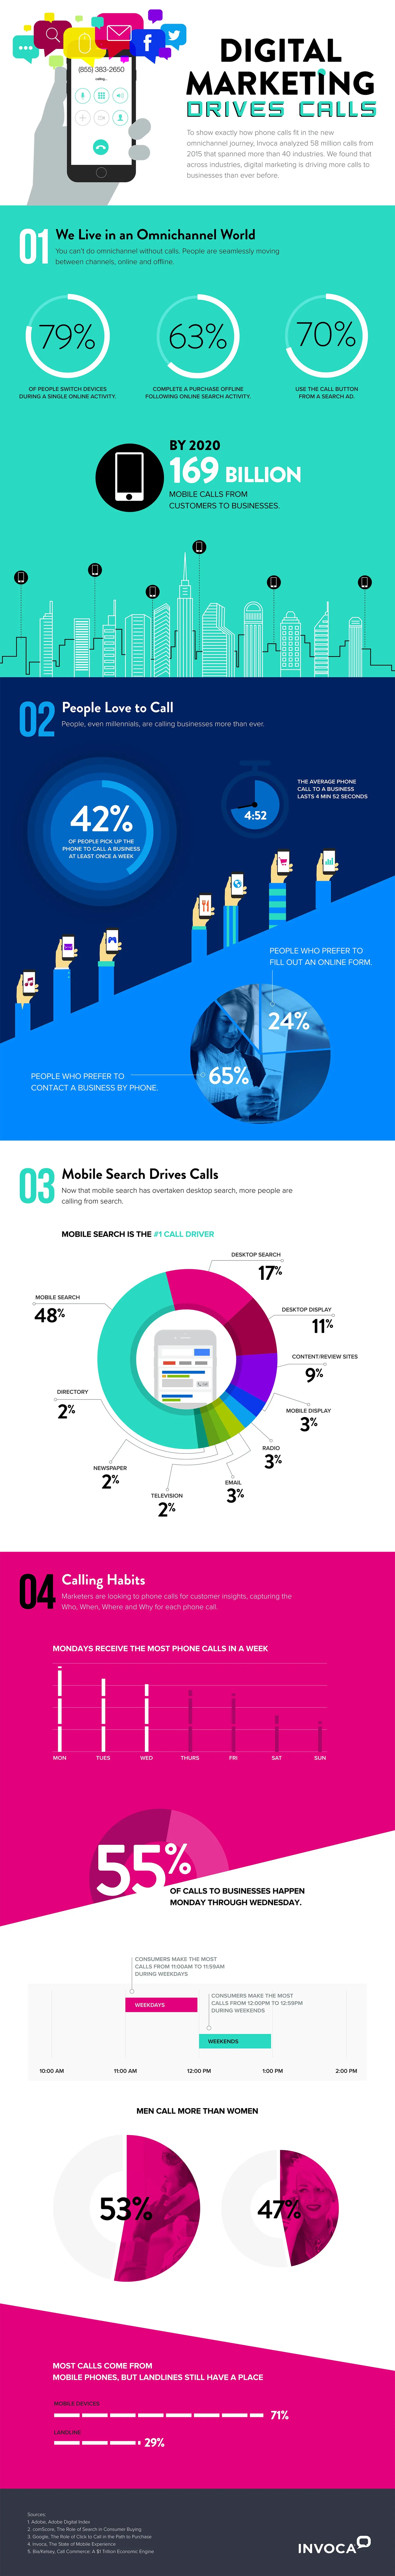 2016 Invoca Call Intelligence Report Infographic